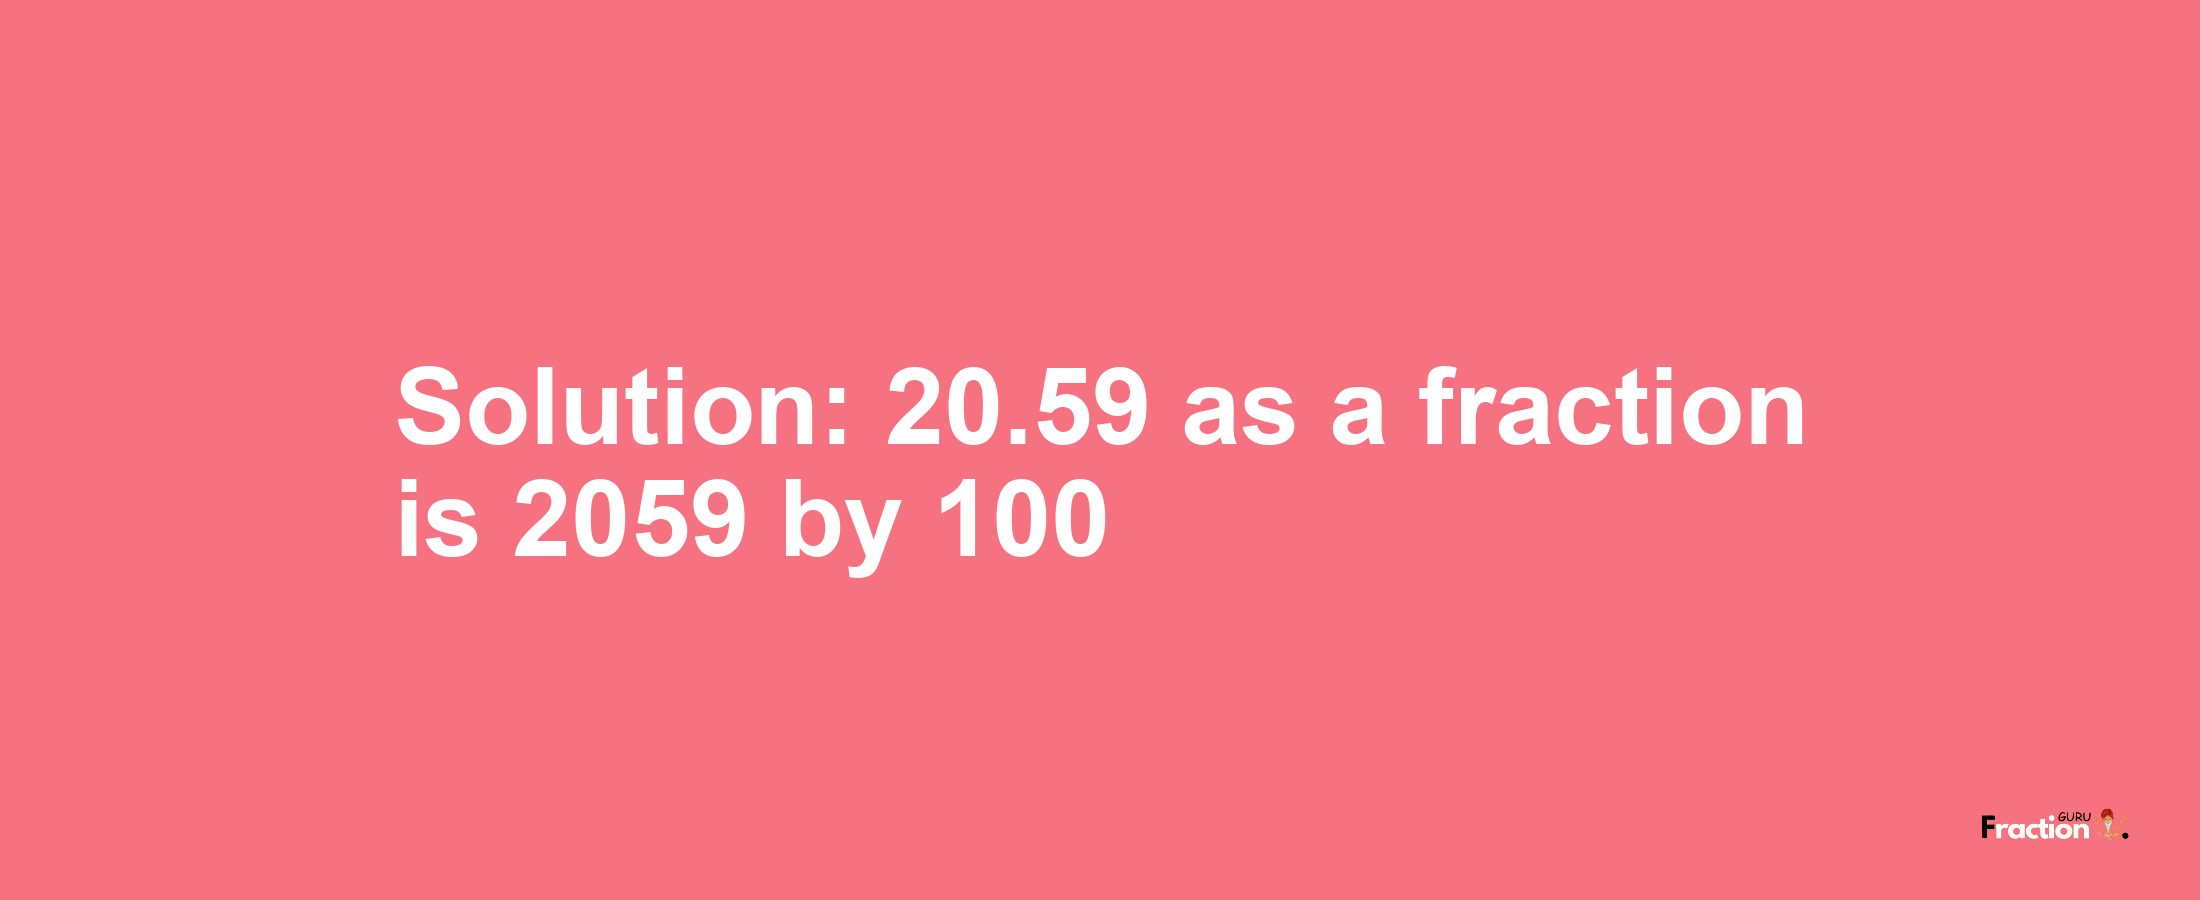 Solution:20.59 as a fraction is 2059/100